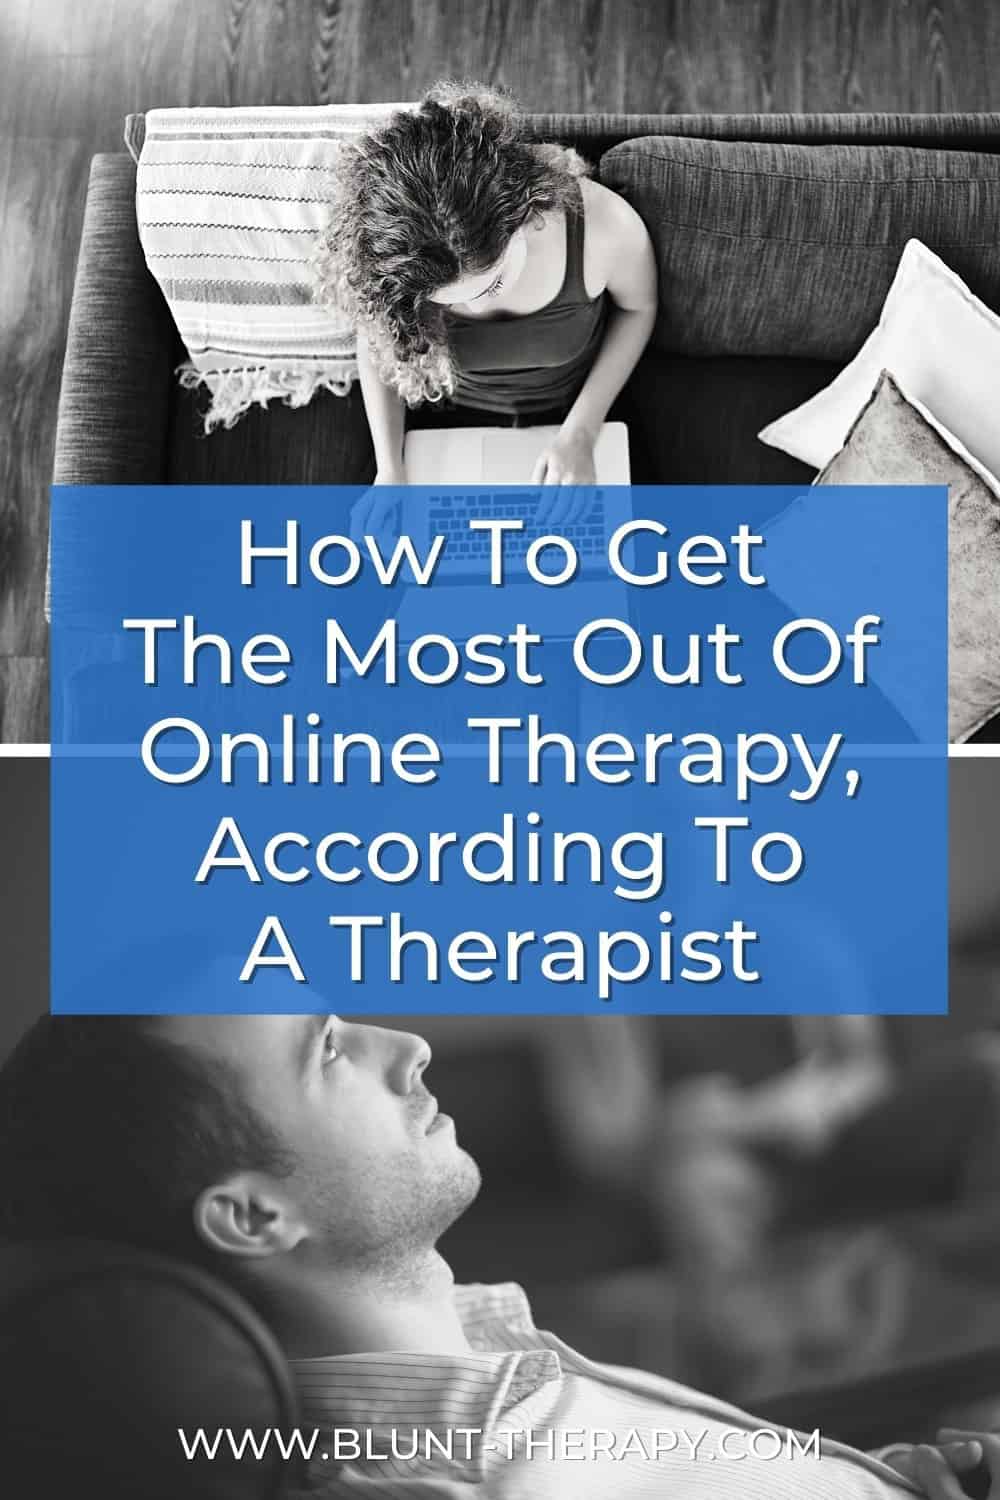 How To Get The Most Out Of Online Therapy, According To A Therapist